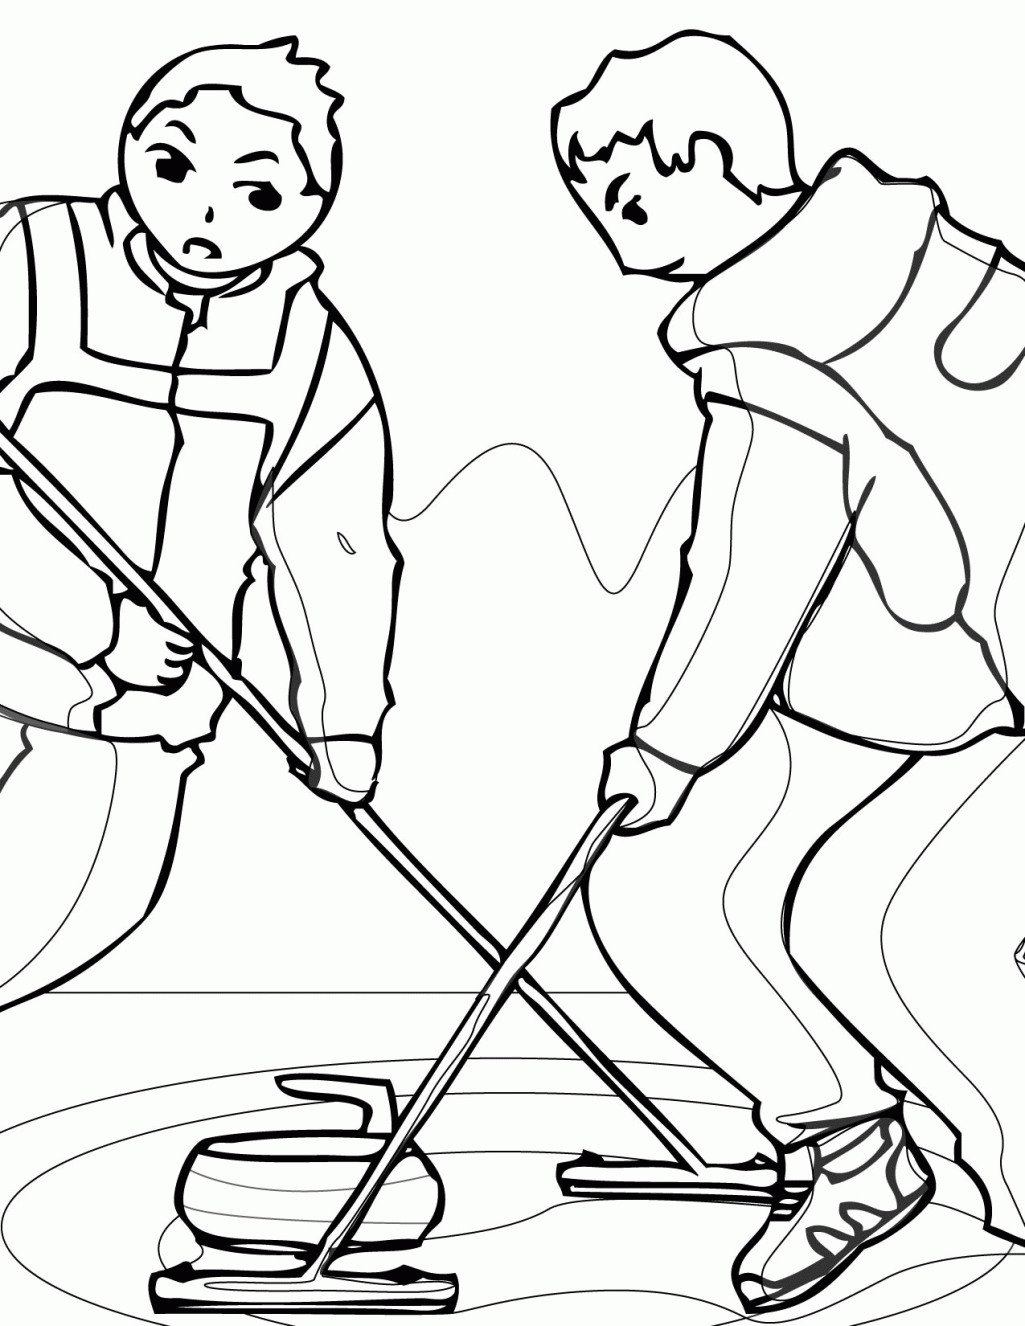 Curling Coloring Page Handipoints Coloring Pages For Winter Sports ...